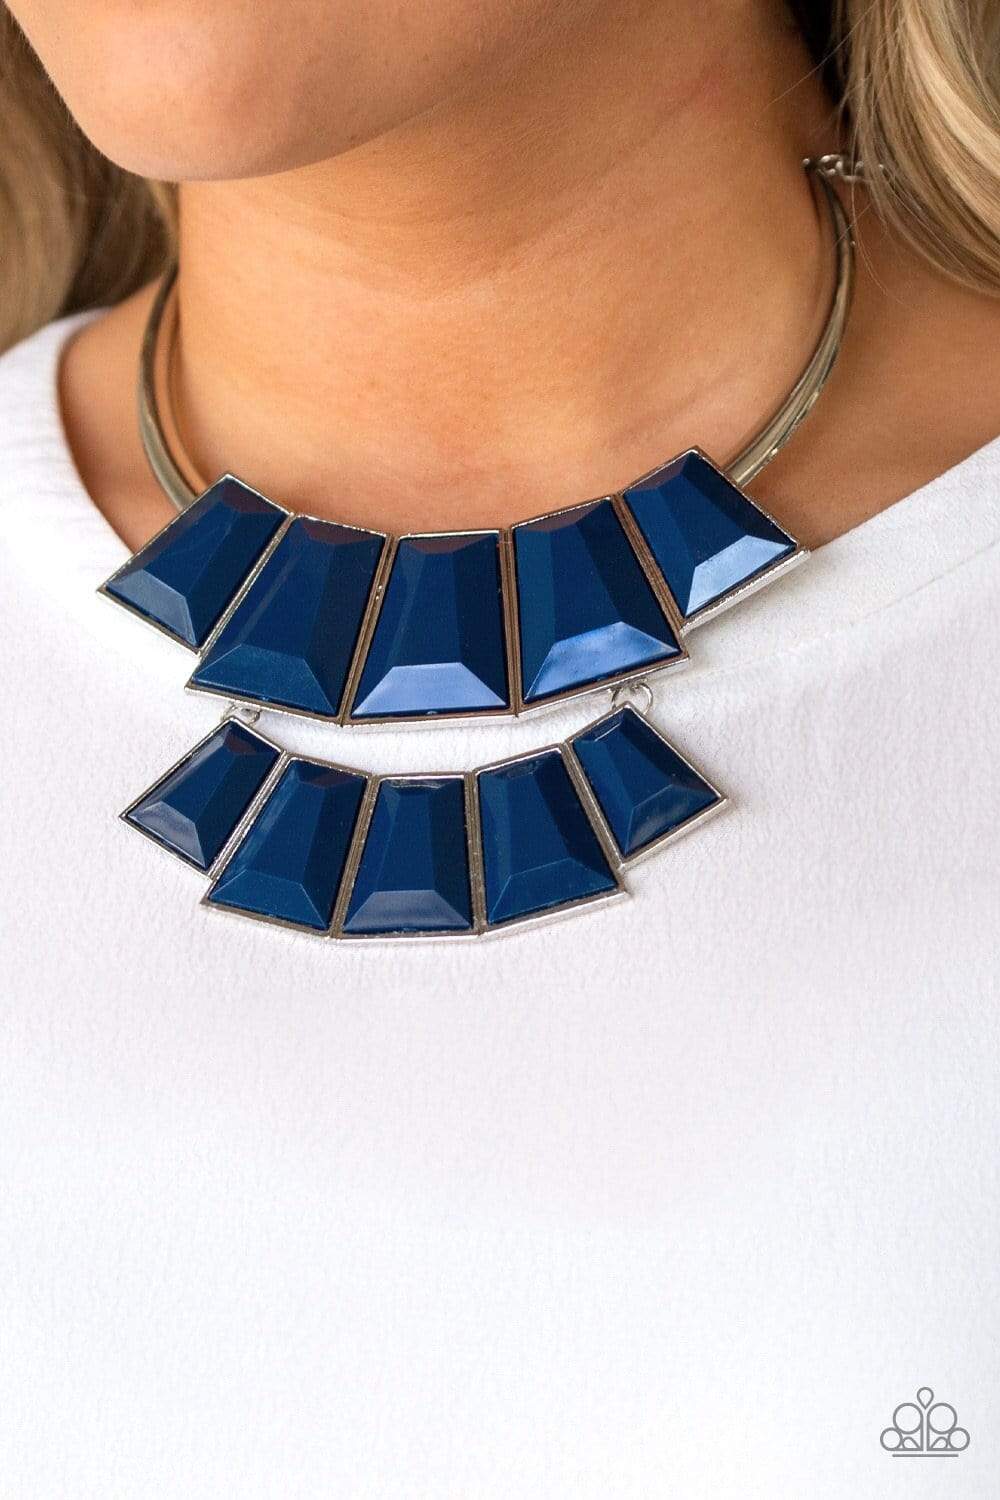 Lions, TIGRESS, and Bears - Blue - Paparazzi Necklace